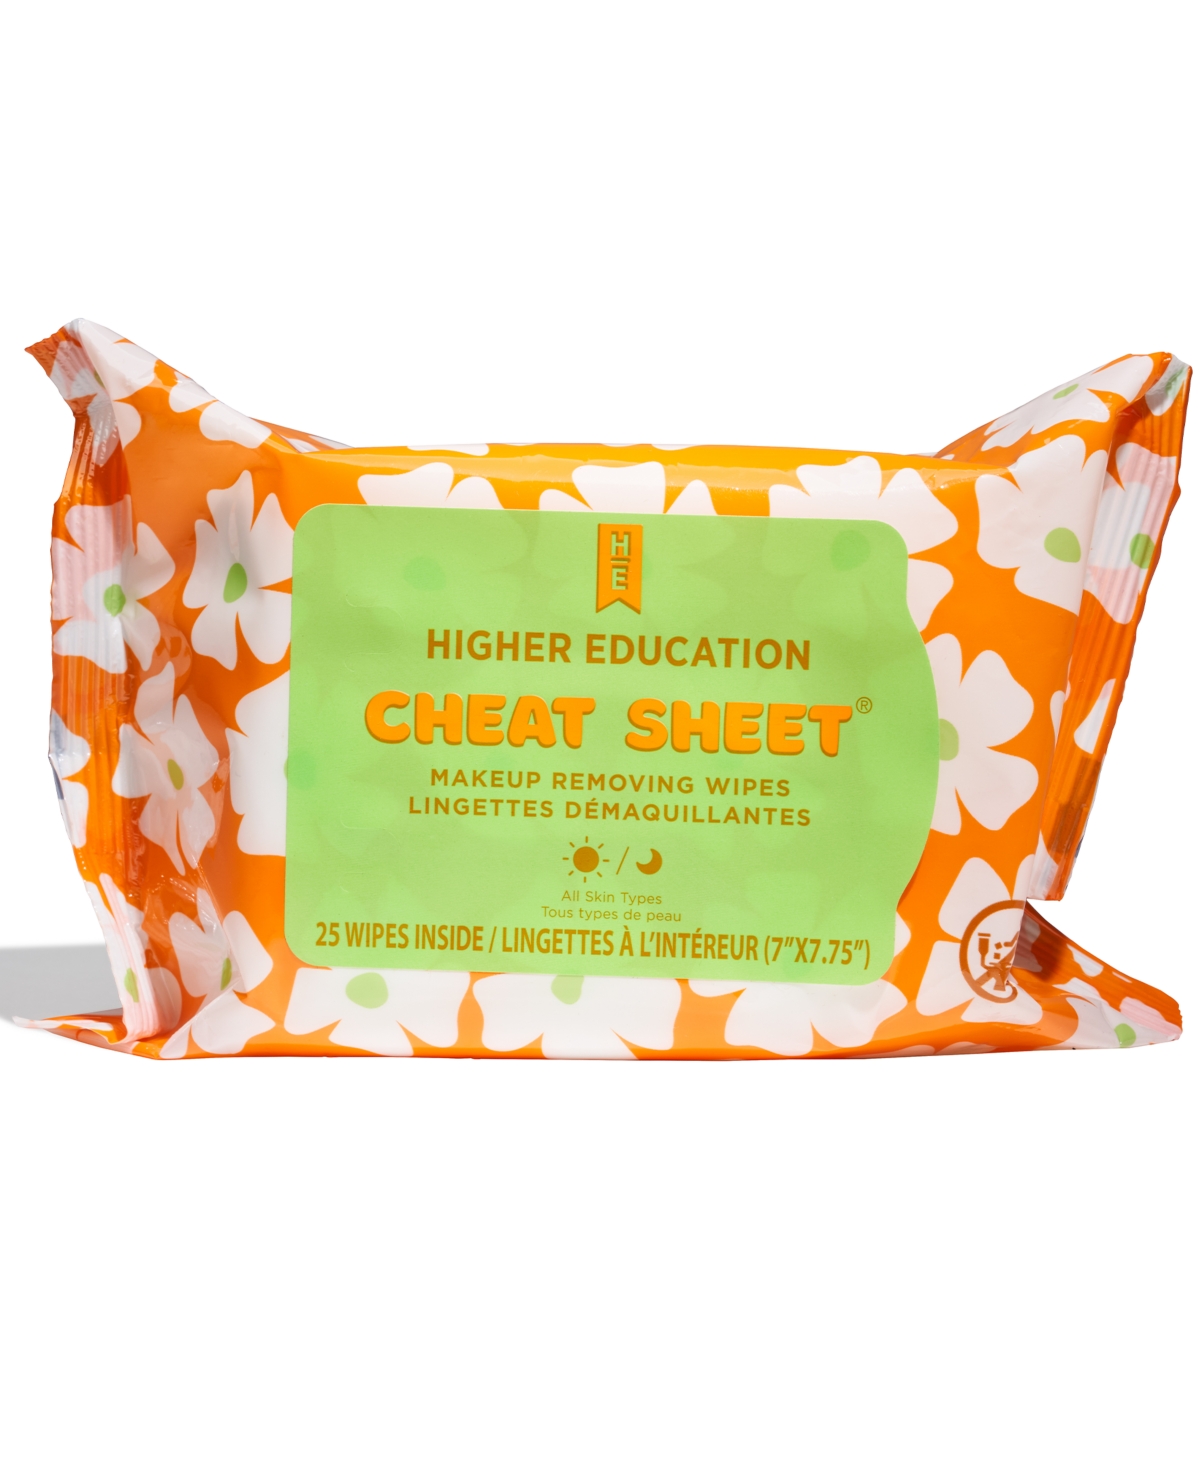 Cheat Sheet Makeup Removing Wipes, 25 Wipes